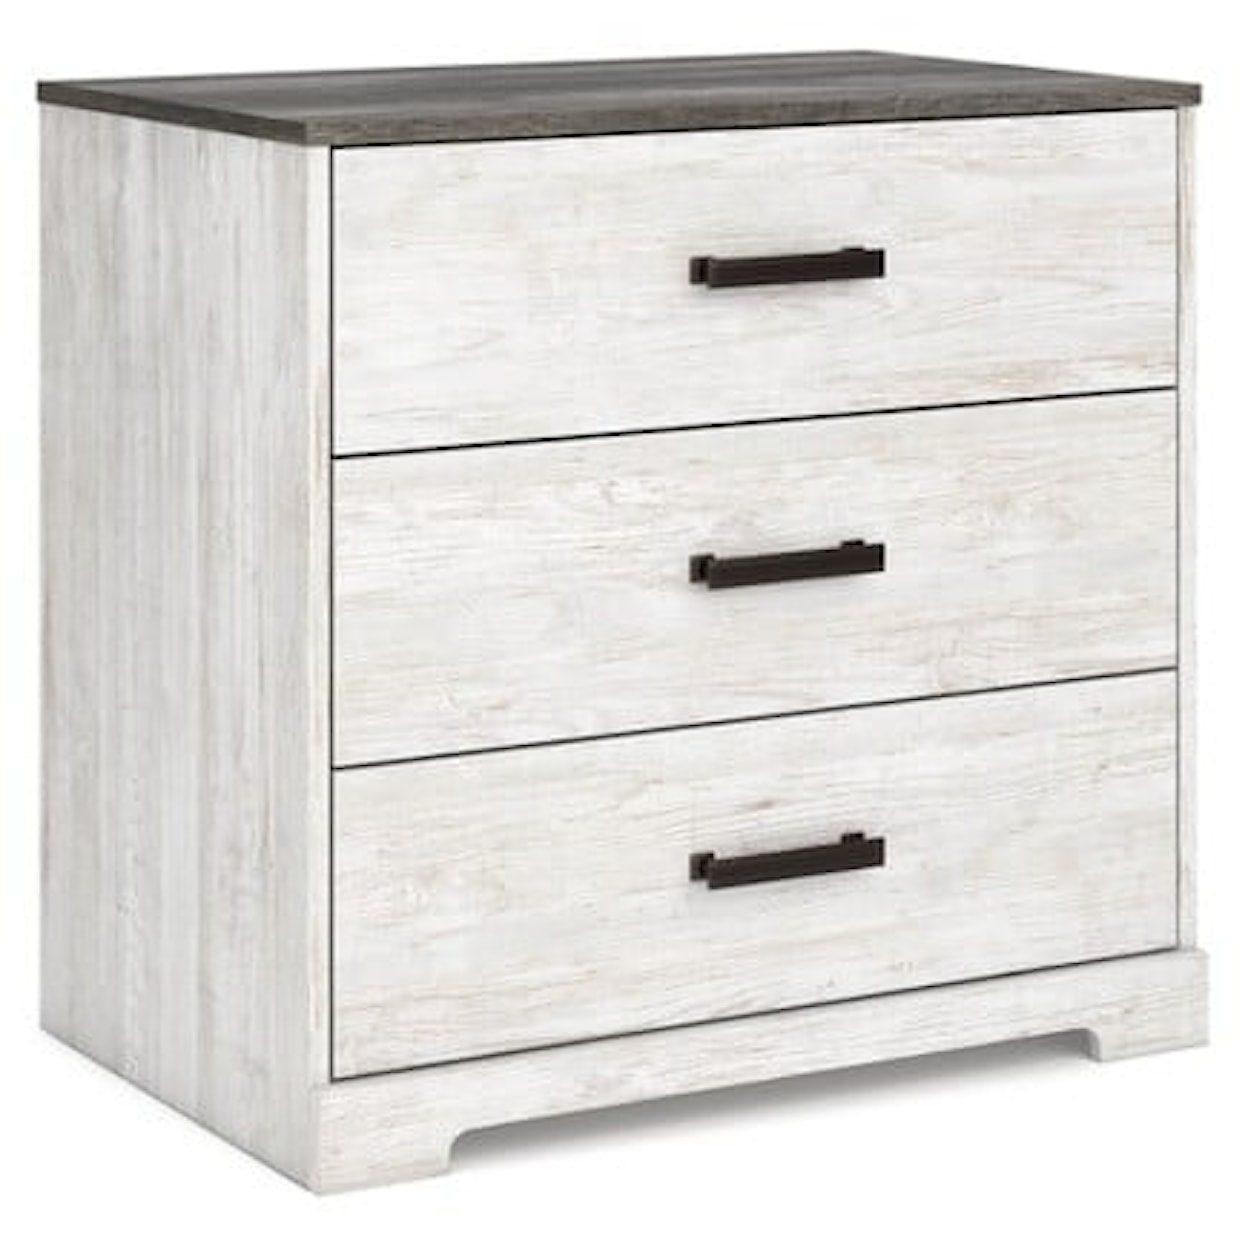 Signature Design by Ashley Shawburn Chest of Drawers